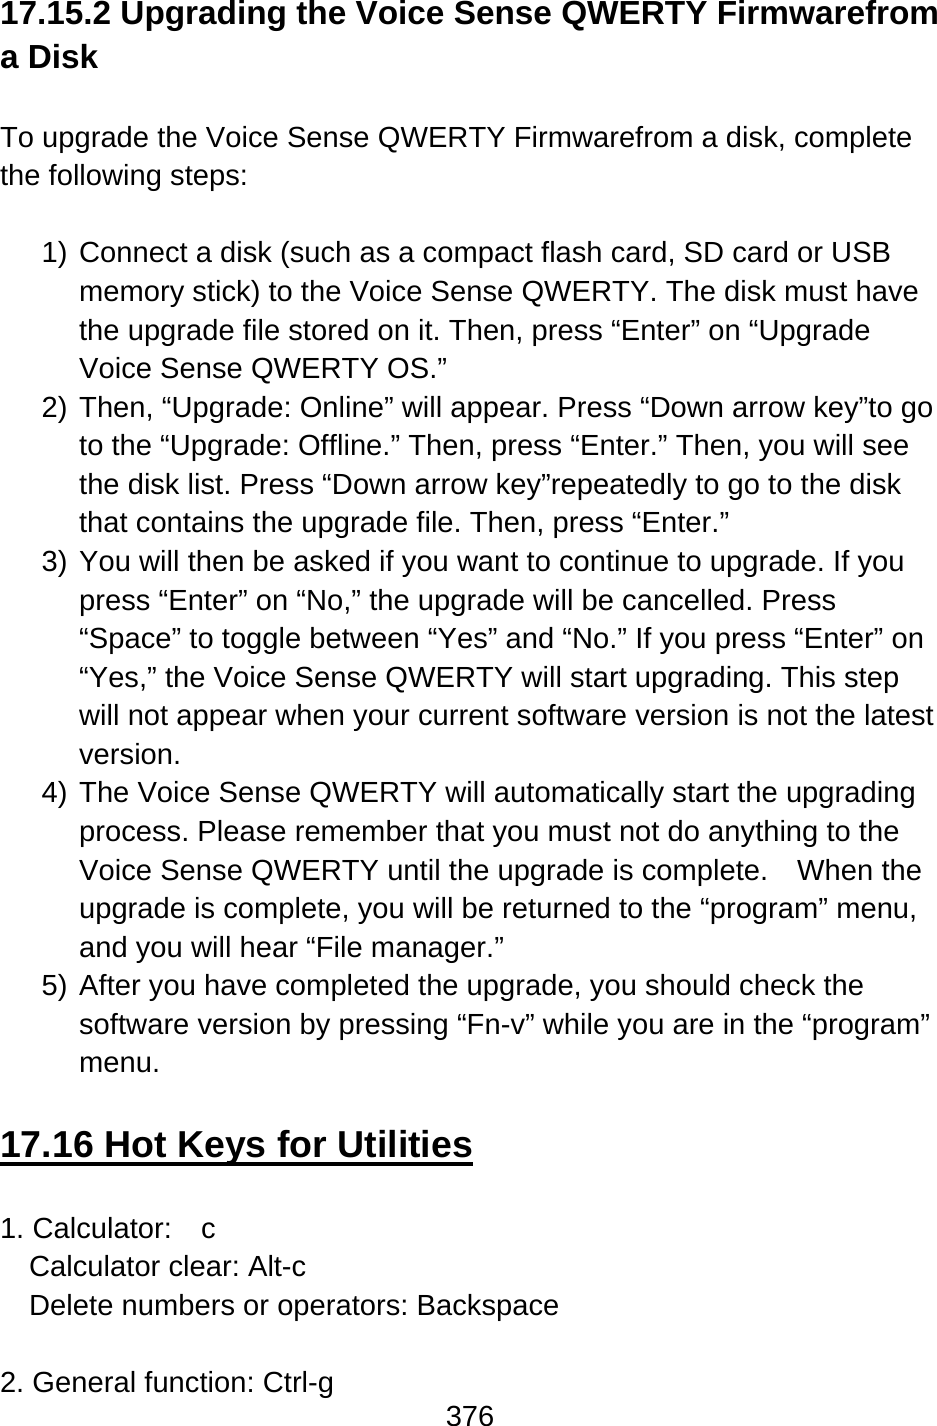 376  17.15.2 Upgrading the Voice Sense QWERTY Firmwarefrom a Disk  To upgrade the Voice Sense QWERTY Firmwarefrom a disk, complete the following steps:  1) Connect a disk (such as a compact flash card, SD card or USB memory stick) to the Voice Sense QWERTY. The disk must have the upgrade file stored on it. Then, press “Enter” on “Upgrade Voice Sense QWERTY OS.” 2) Then, “Upgrade: Online” will appear. Press “Down arrow key”to go to the “Upgrade: Offline.” Then, press “Enter.” Then, you will see the disk list. Press “Down arrow key”repeatedly to go to the disk that contains the upgrade file. Then, press “Enter.” 3) You will then be asked if you want to continue to upgrade. If you press “Enter” on “No,” the upgrade will be cancelled. Press “Space” to toggle between “Yes” and “No.” If you press “Enter” on “Yes,” the Voice Sense QWERTY will start upgrading. This step will not appear when your current software version is not the latest version. 4) The Voice Sense QWERTY will automatically start the upgrading process. Please remember that you must not do anything to the Voice Sense QWERTY until the upgrade is complete.    When the upgrade is complete, you will be returned to the “program” menu, and you will hear “File manager.” 5) After you have completed the upgrade, you should check the software version by pressing “Fn-v” while you are in the “program” menu.  17.16 Hot Keys for Utilities  1. Calculator:    c Calculator clear: Alt-c Delete numbers or operators: Backspace  2. General function: Ctrl-g 